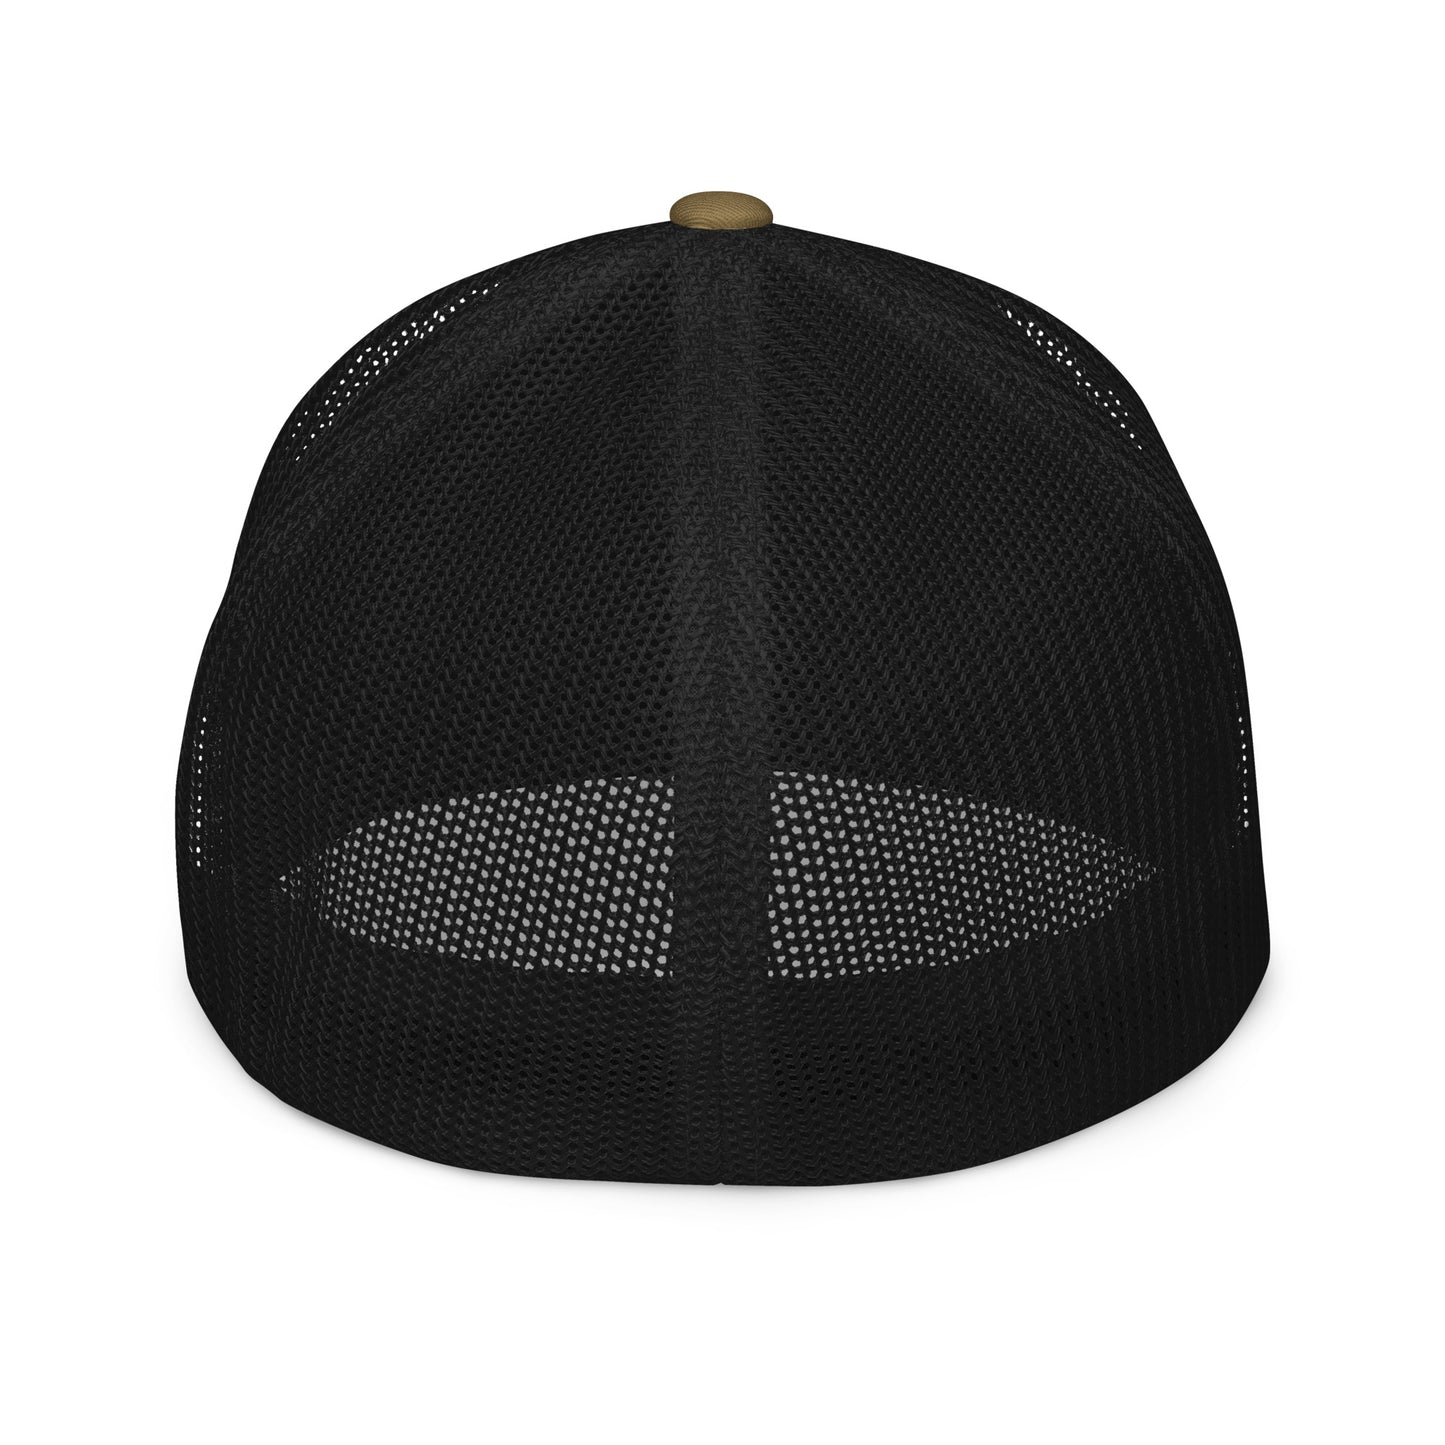 ORKU Mesh Fitted Hat